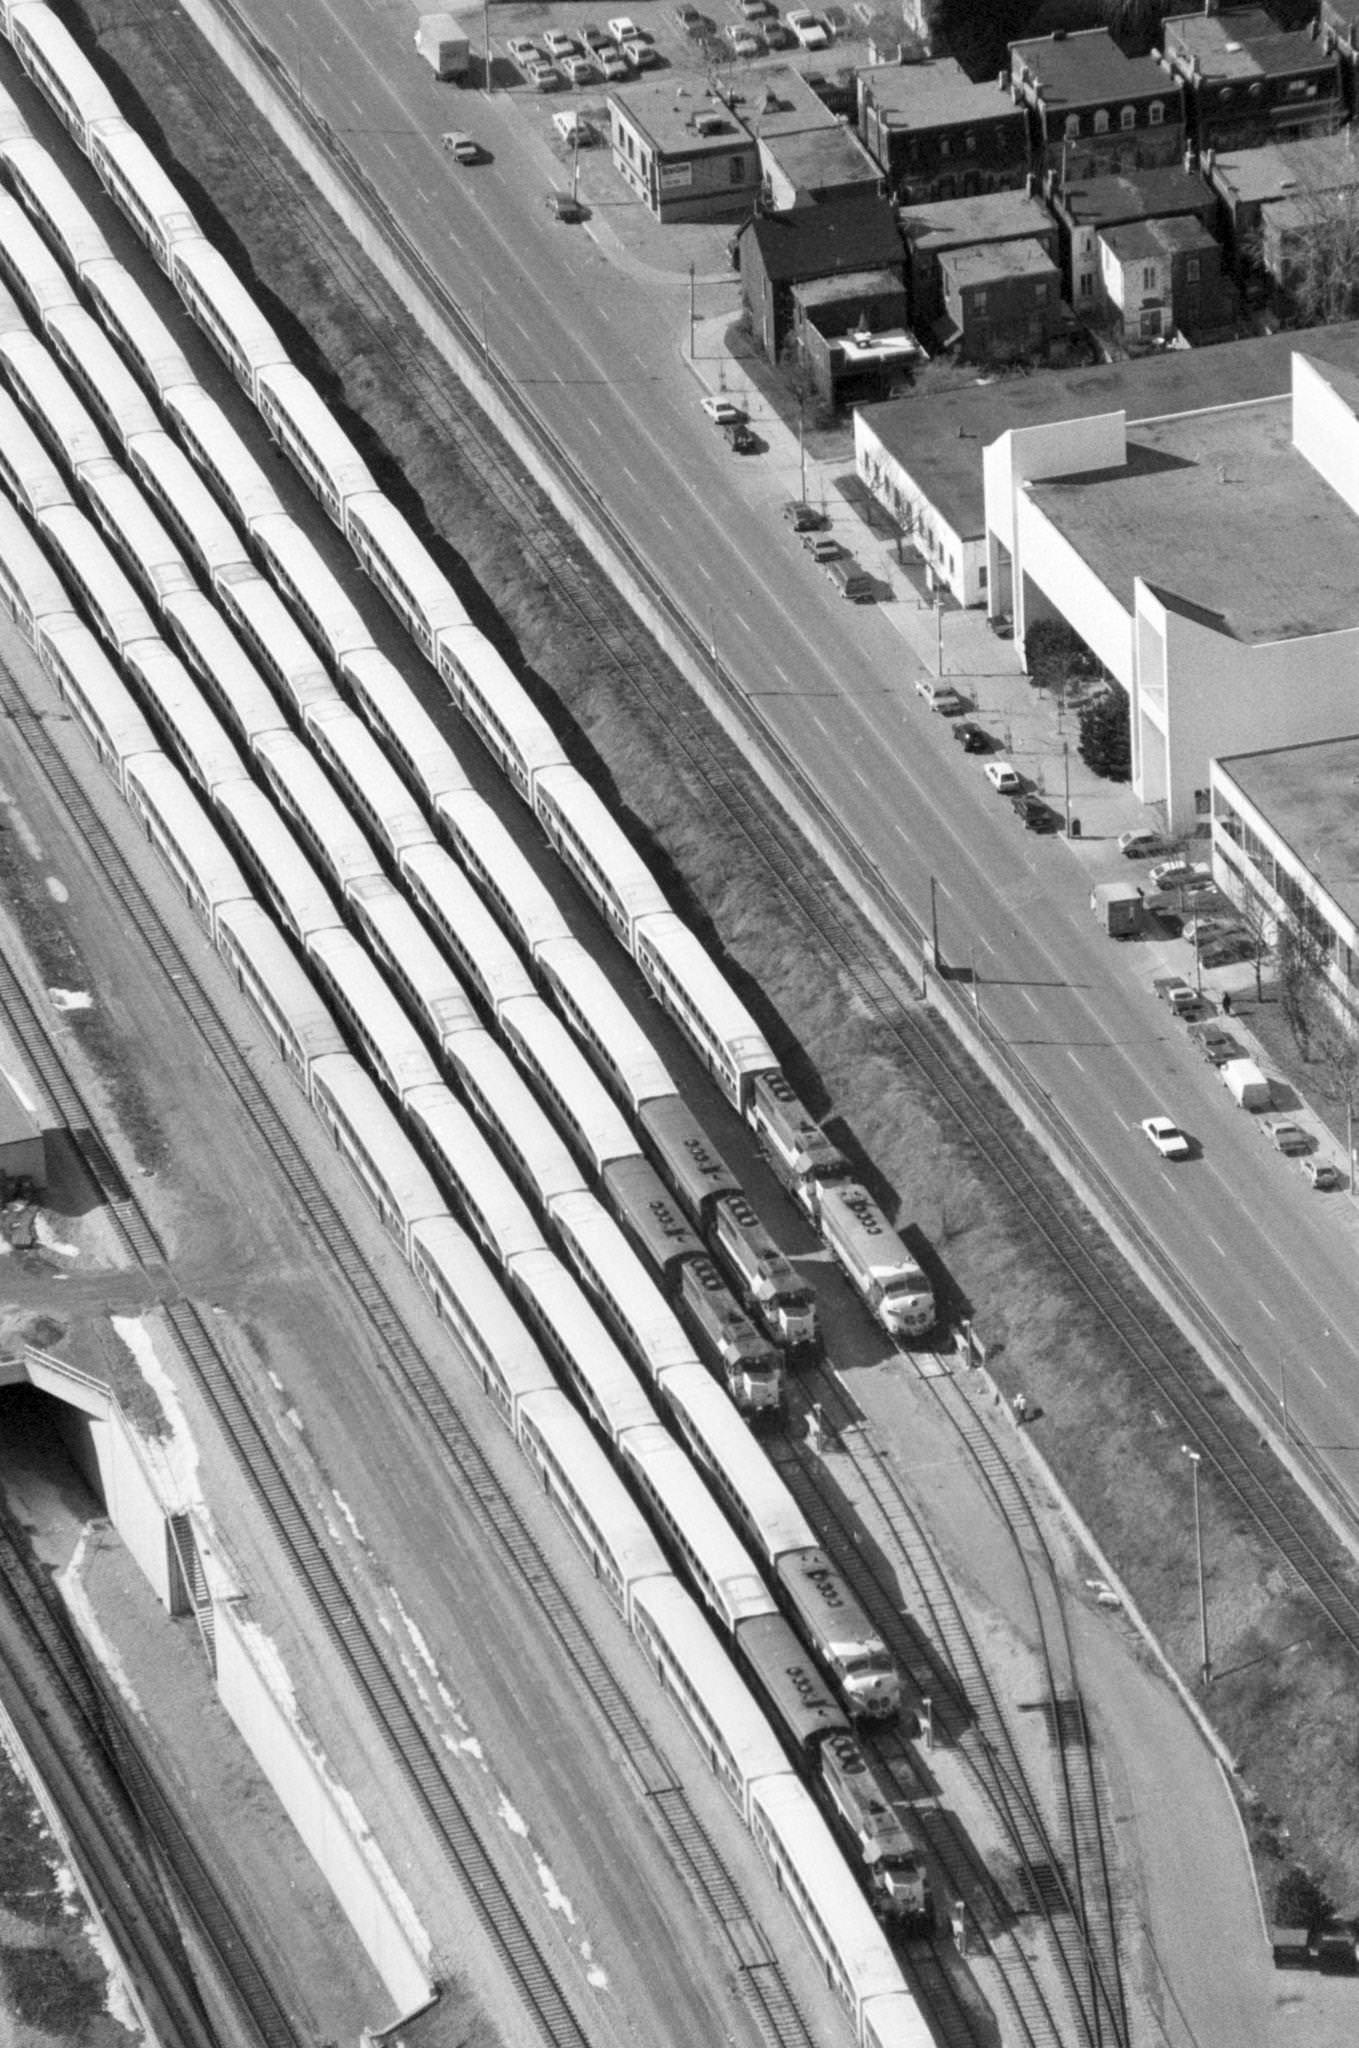 Aerial view of trains parked in station, Toronto, 1980s